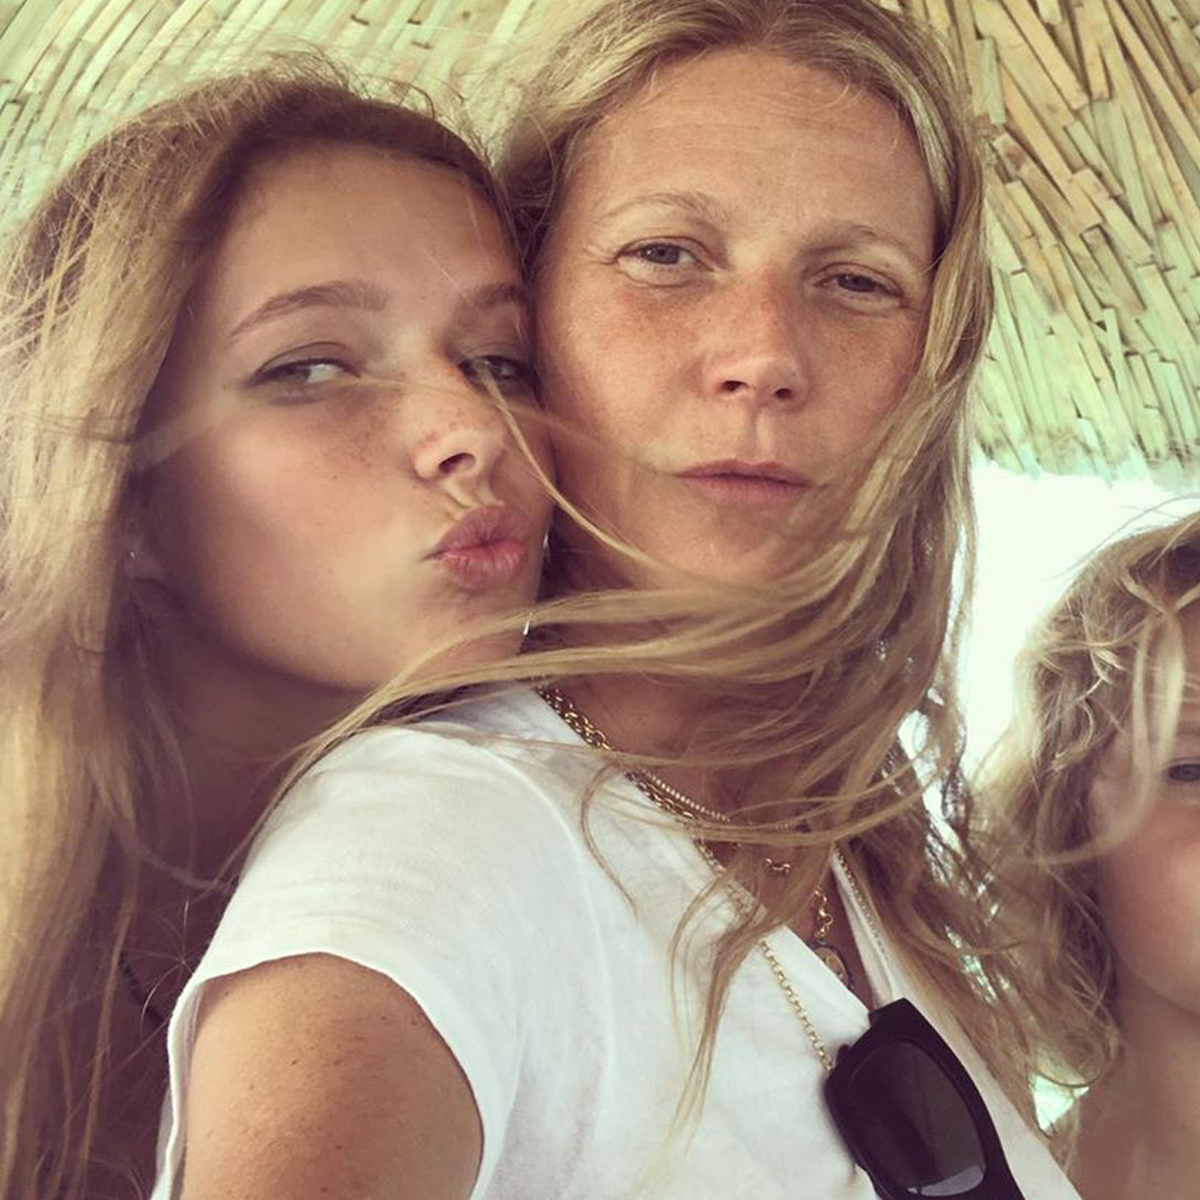 Gwyneth Paltrow Gets Trolled By Daughter Over Goop's NSFW Products - E! Online